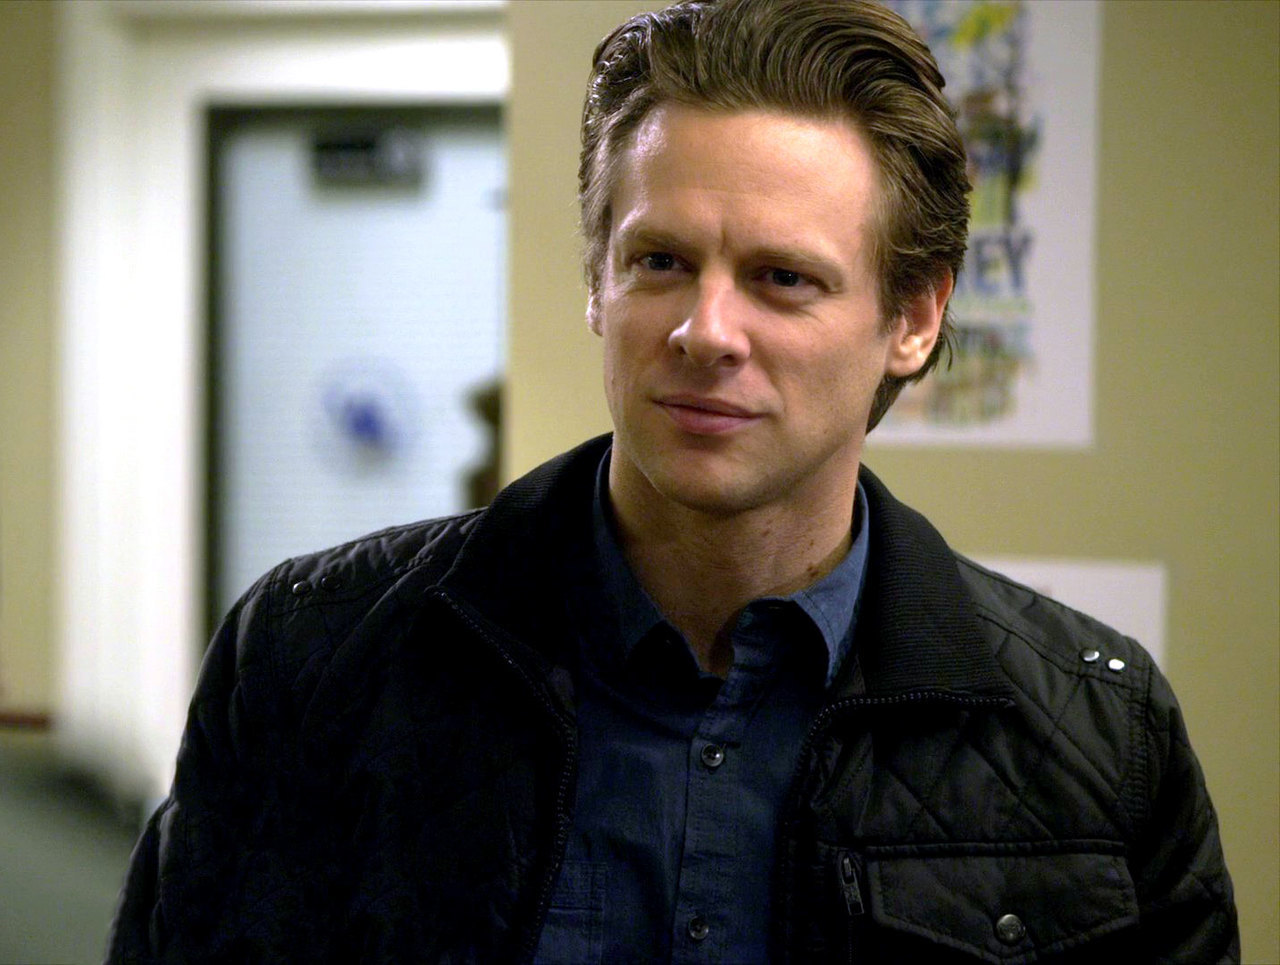 Justified Cast on FX and Hulu - Jacob Pitts as Tim Gutterson